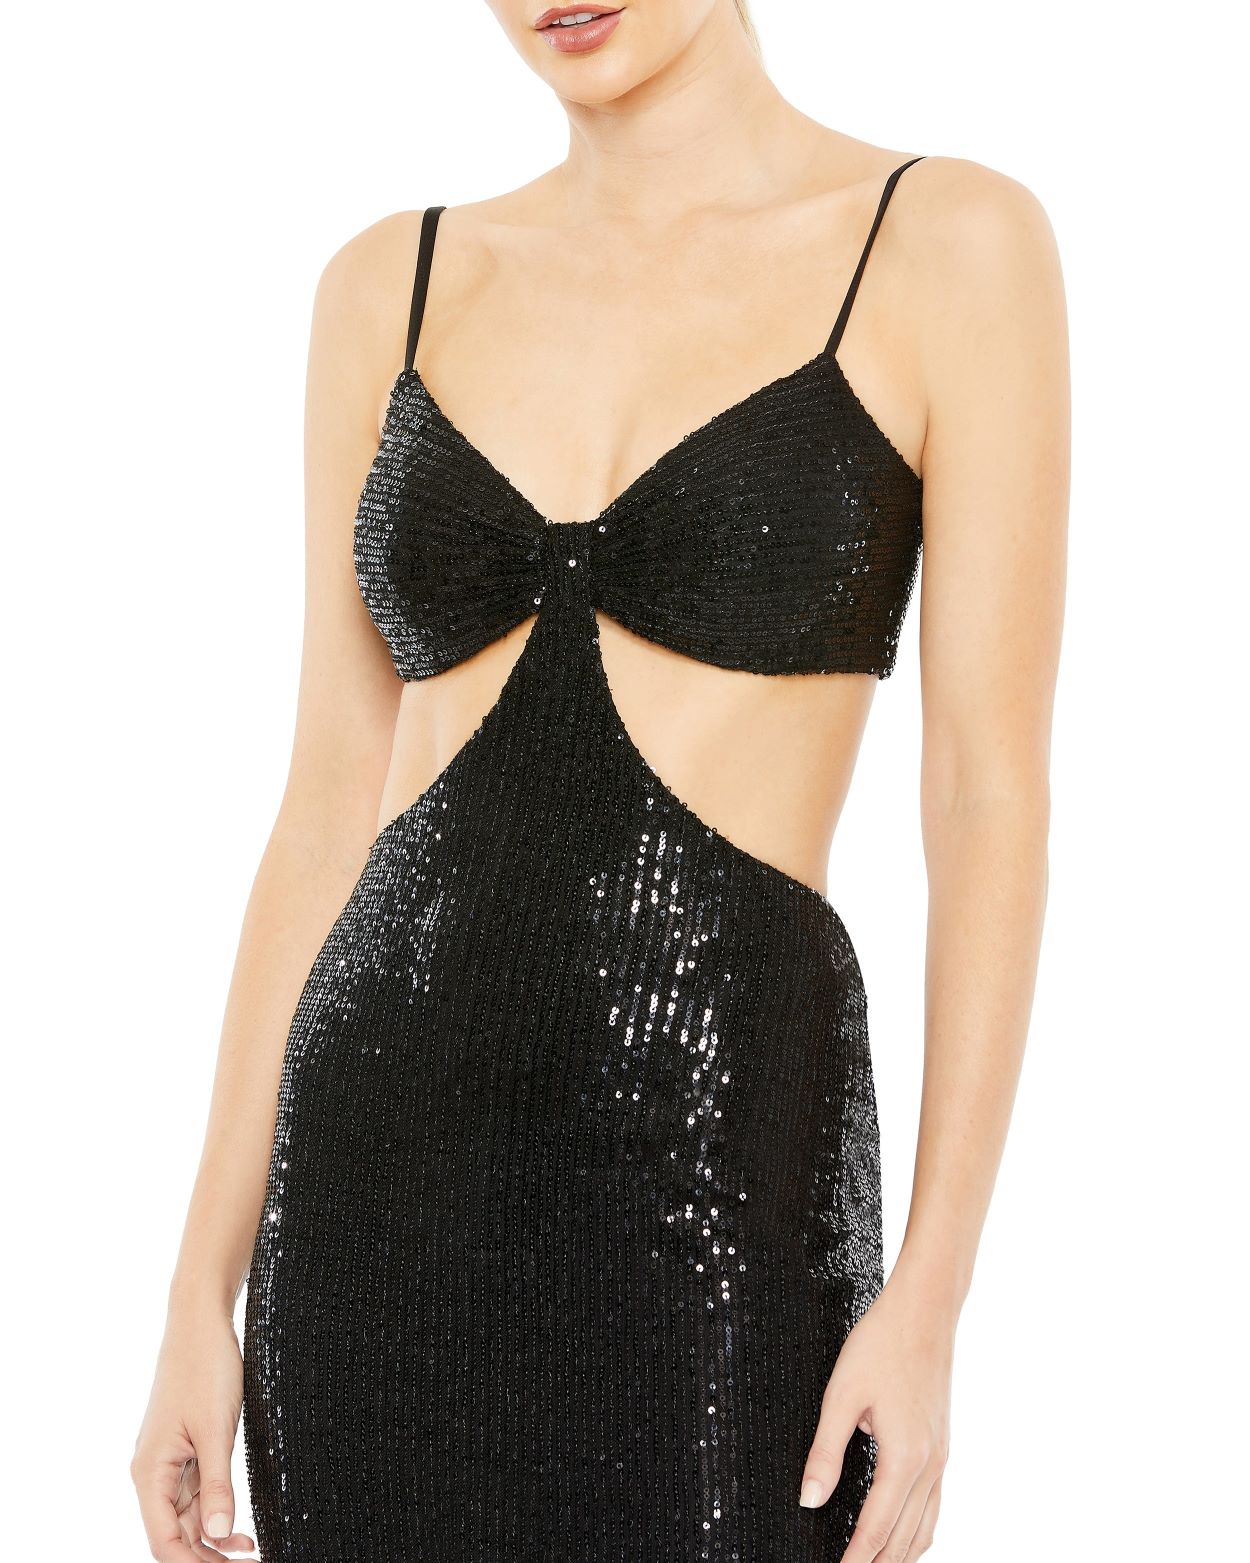 Sequined Spaghetti Strap Cut Out Gown - FINAL SALE